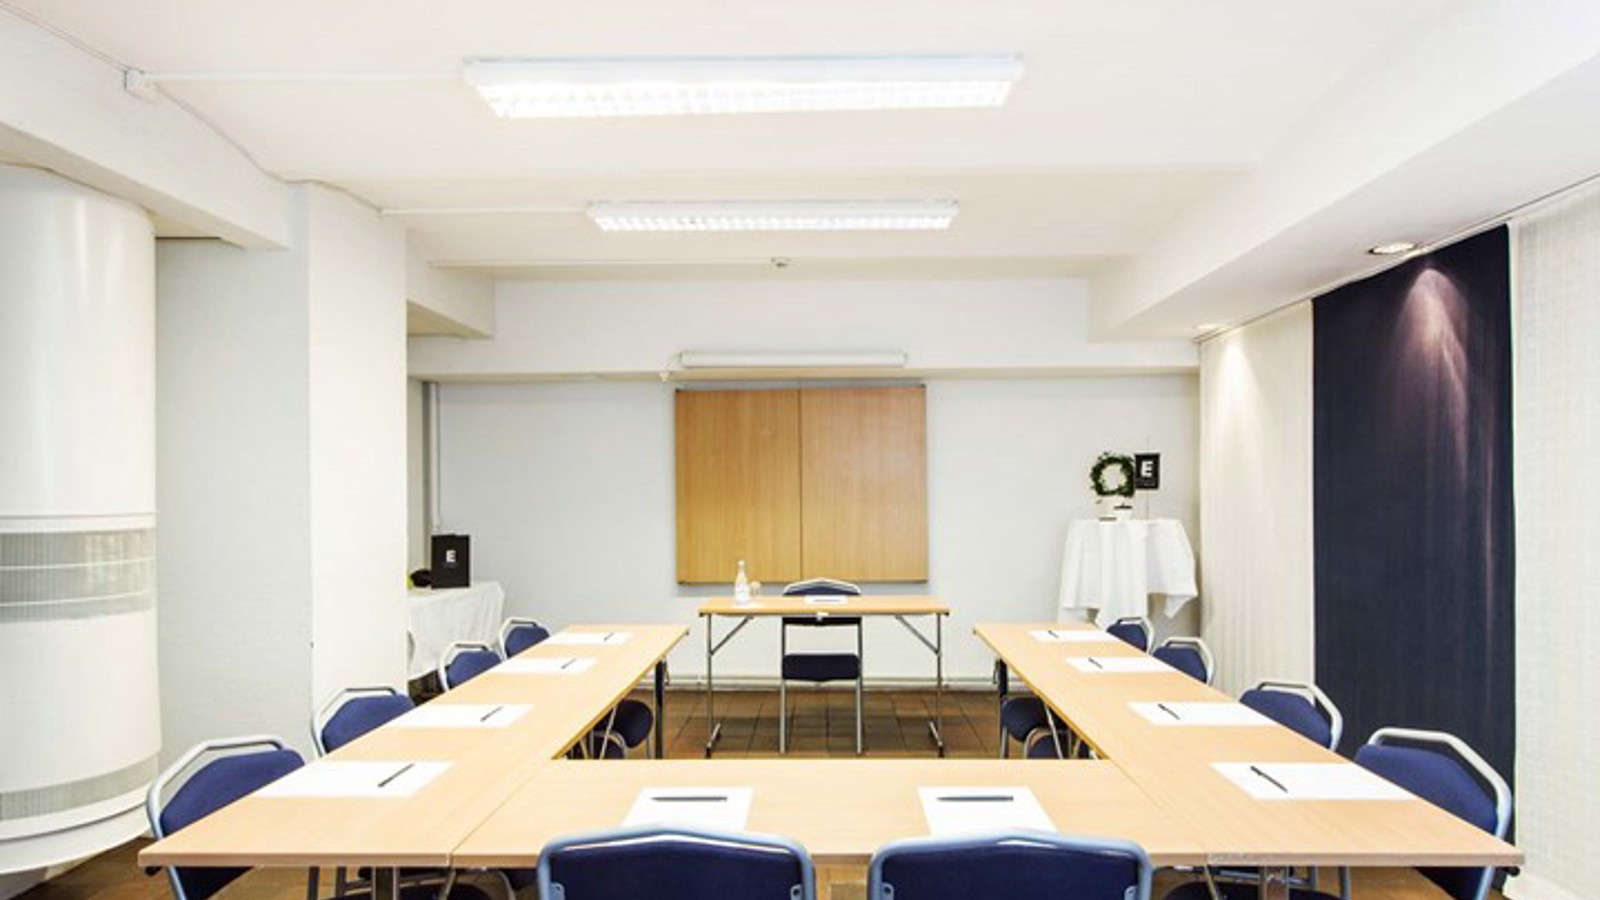 Conference room with U-shaped seating, white walls and light wooden table